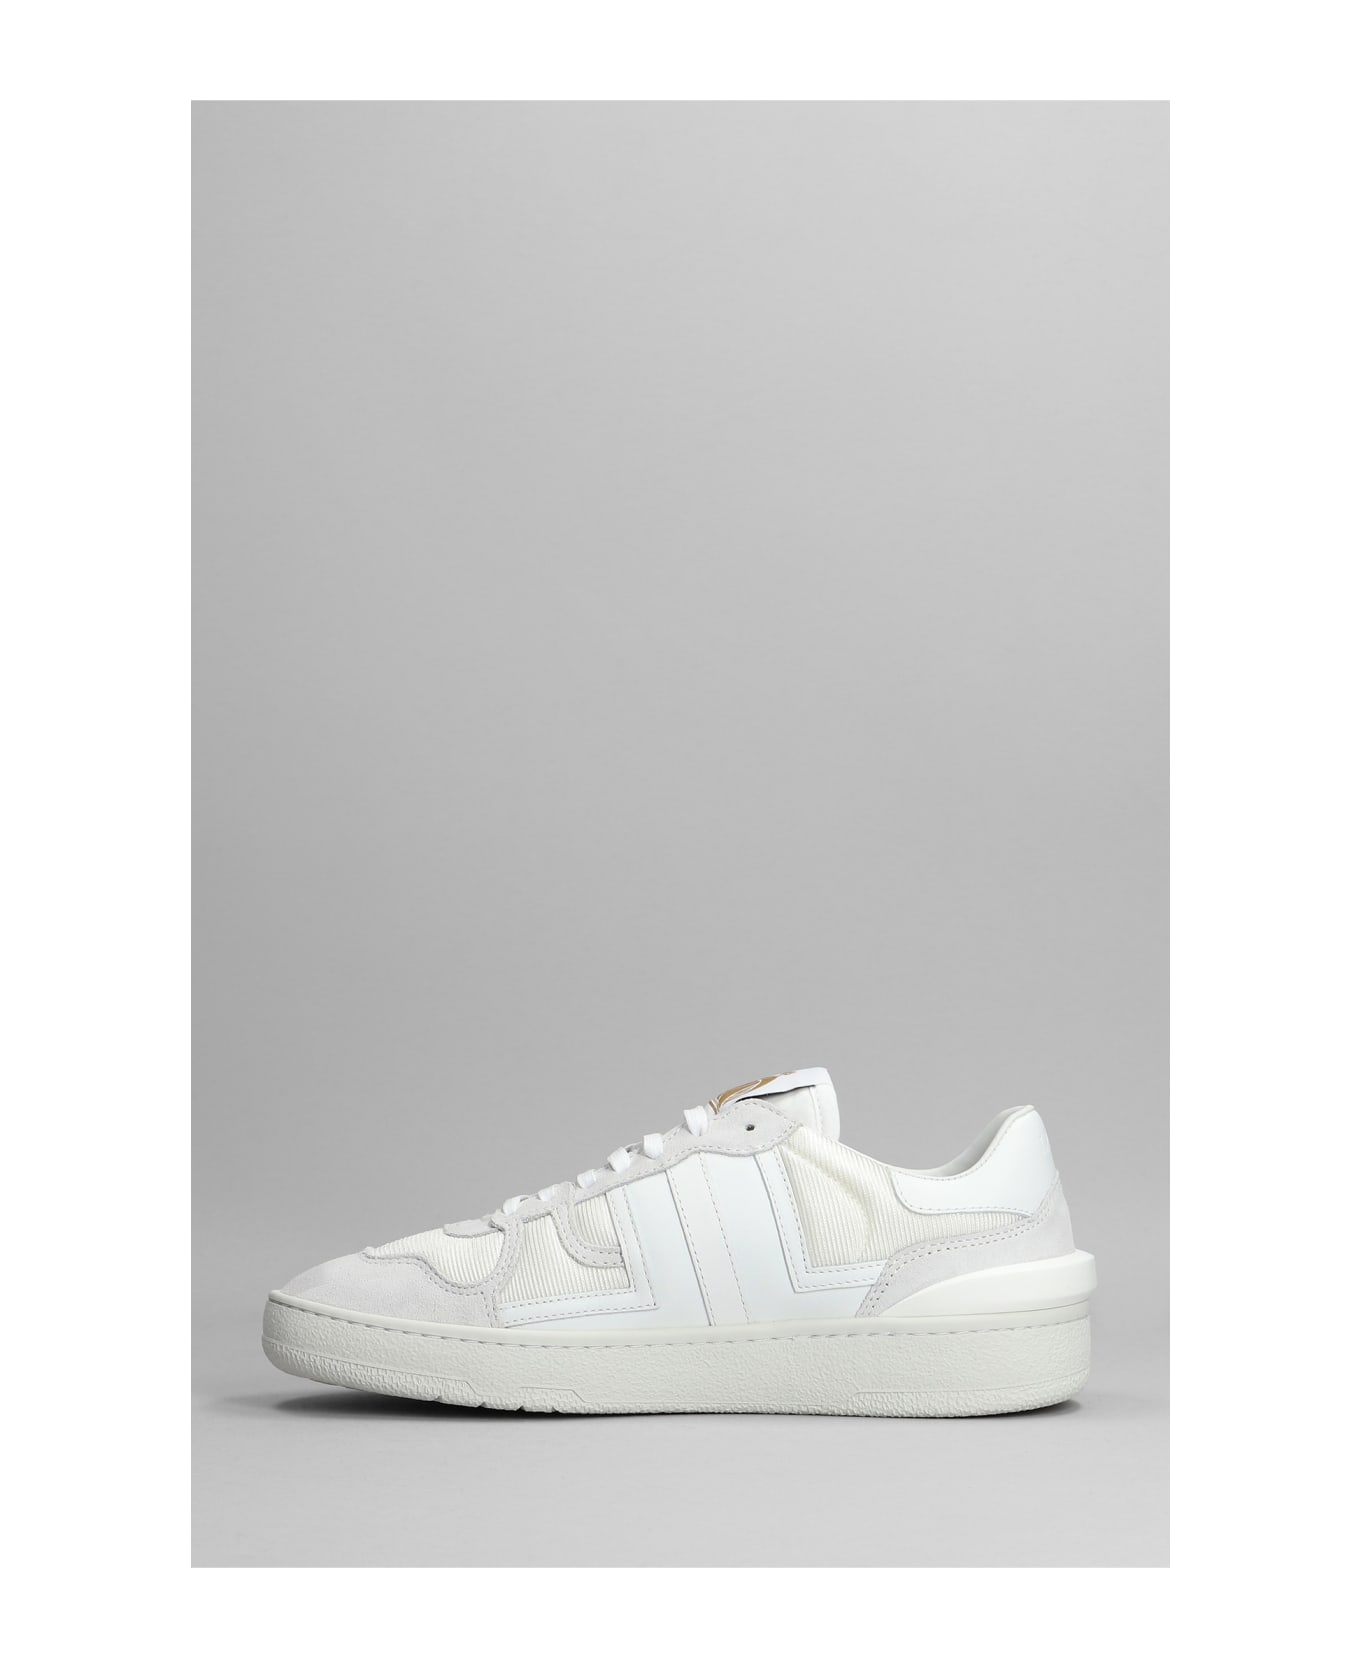 Lanvin Sneakers In White Suede And Leather - white